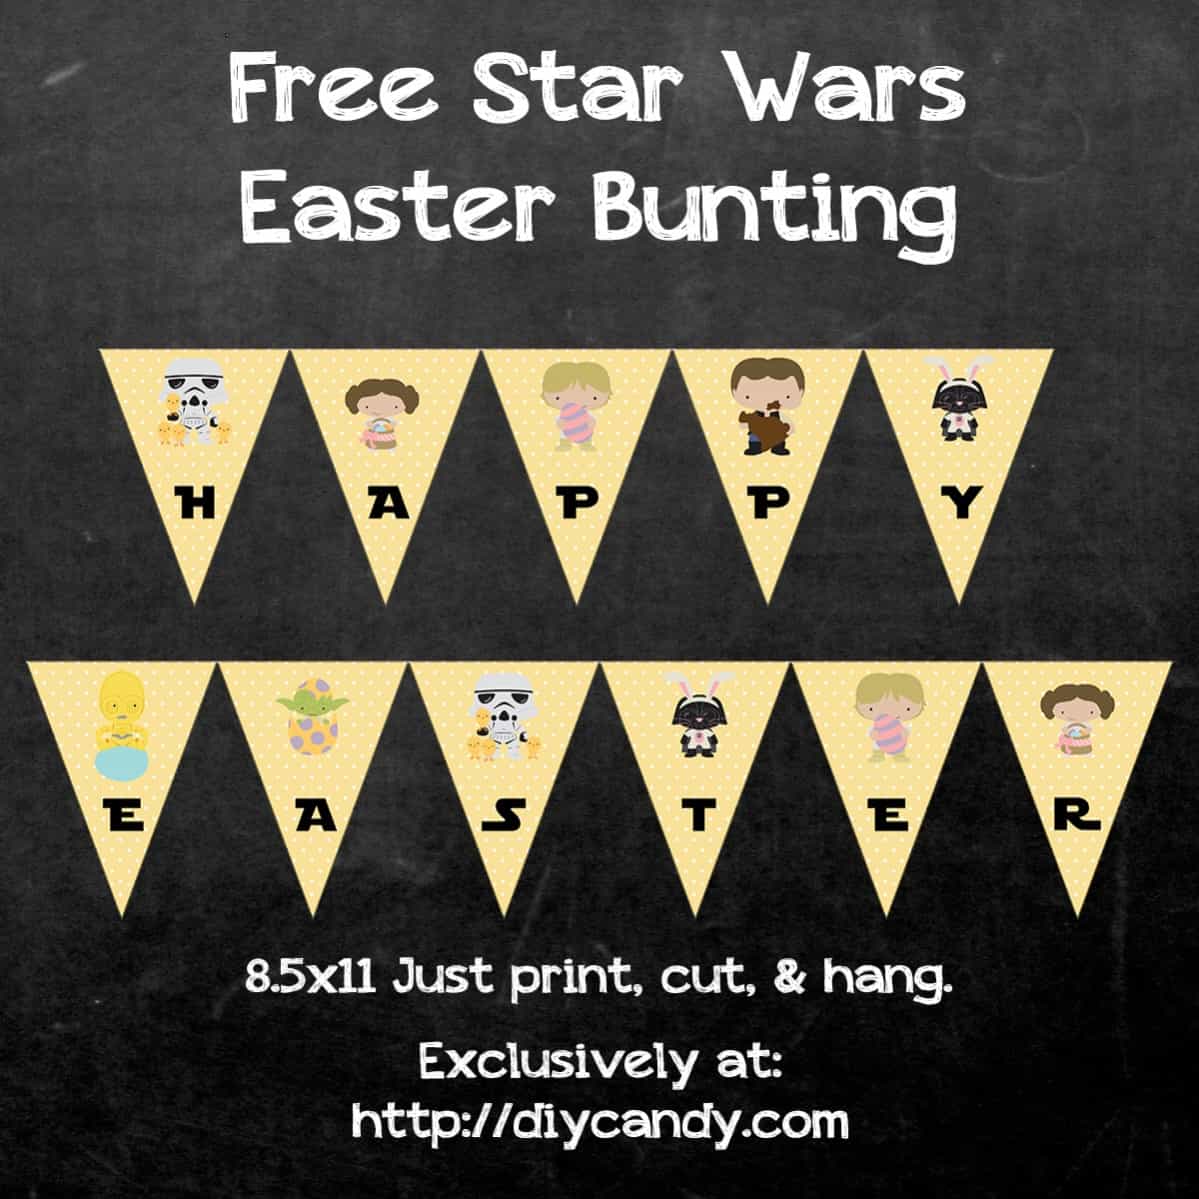 Star Wars Easter Bunting